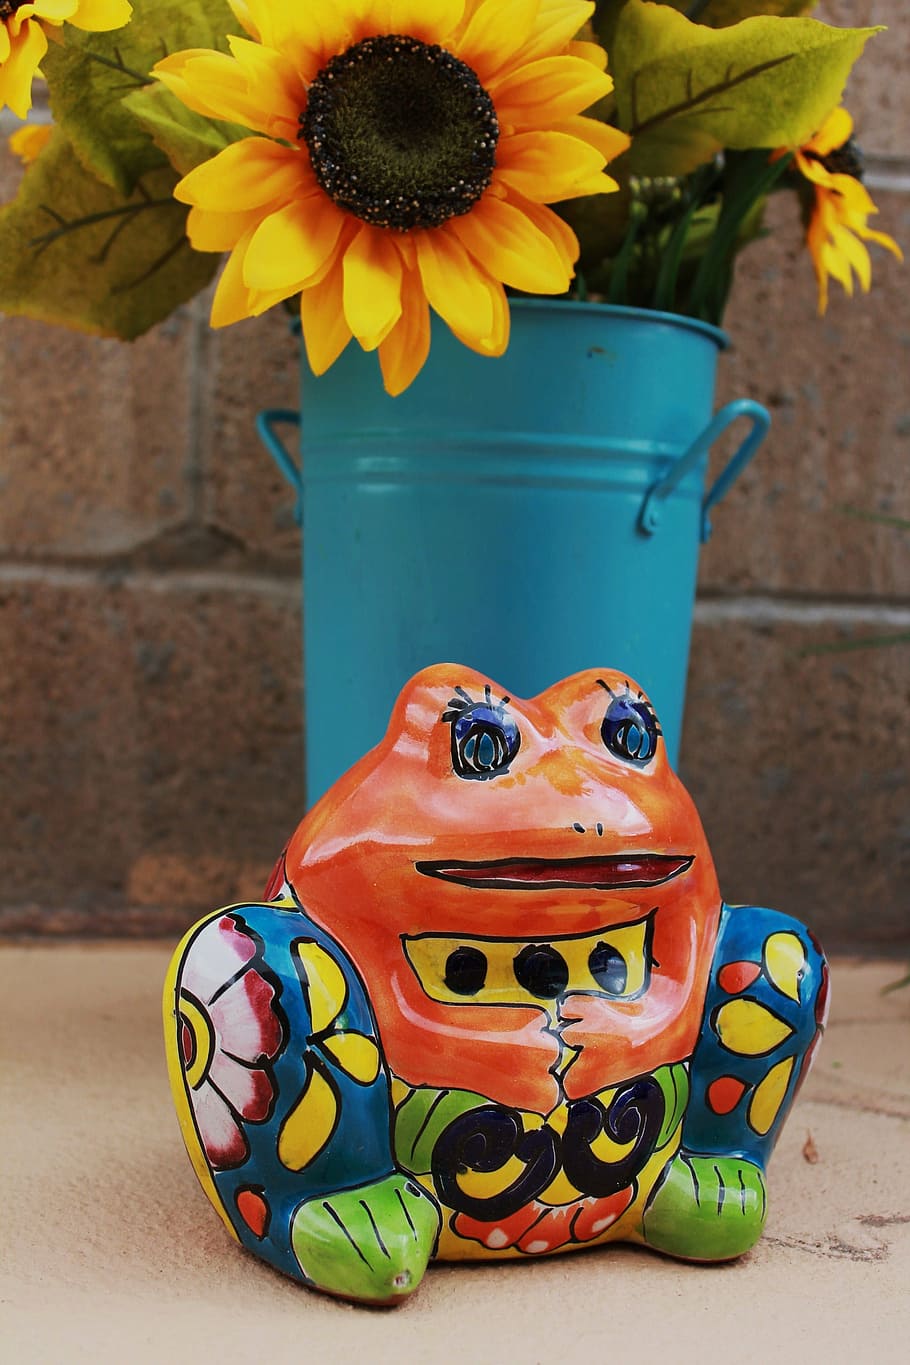 frog, colorful, new mexico, southwestern art, cute, toad, animal art, patio, planter, yellow flower